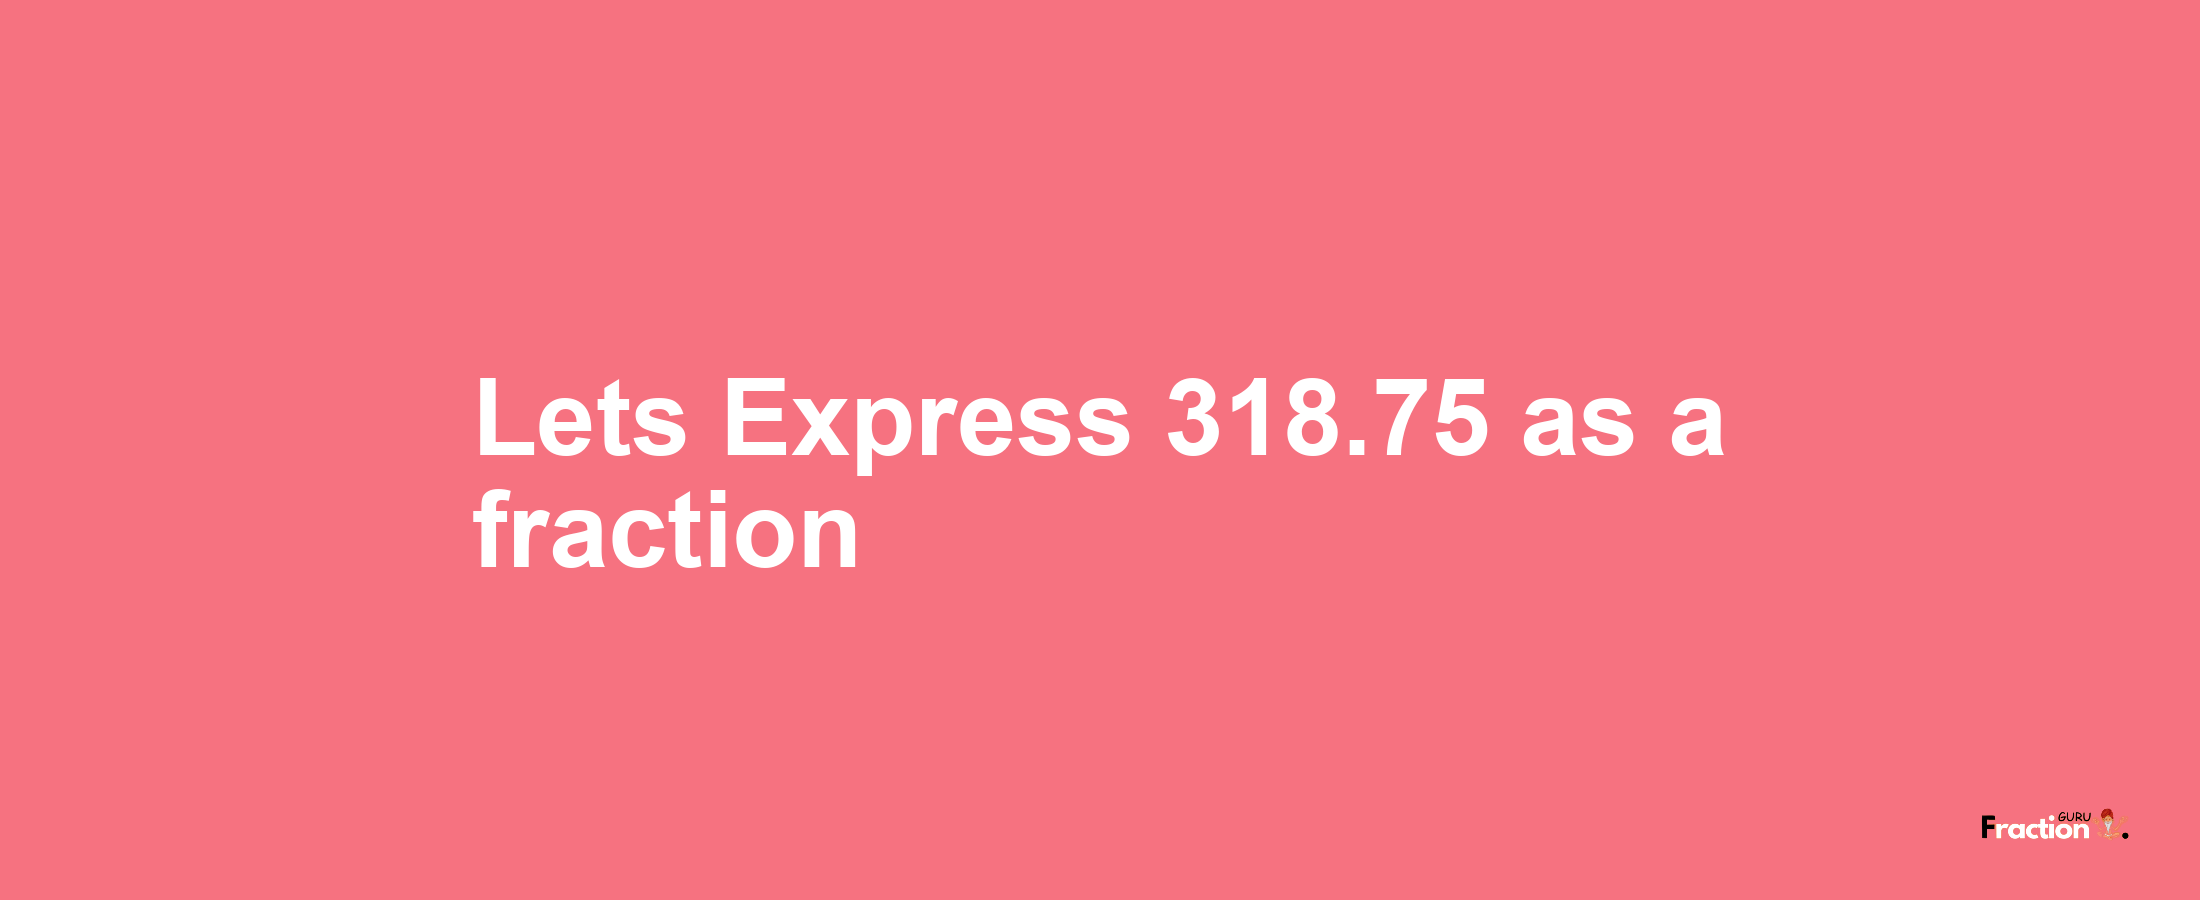 Lets Express 318.75 as afraction